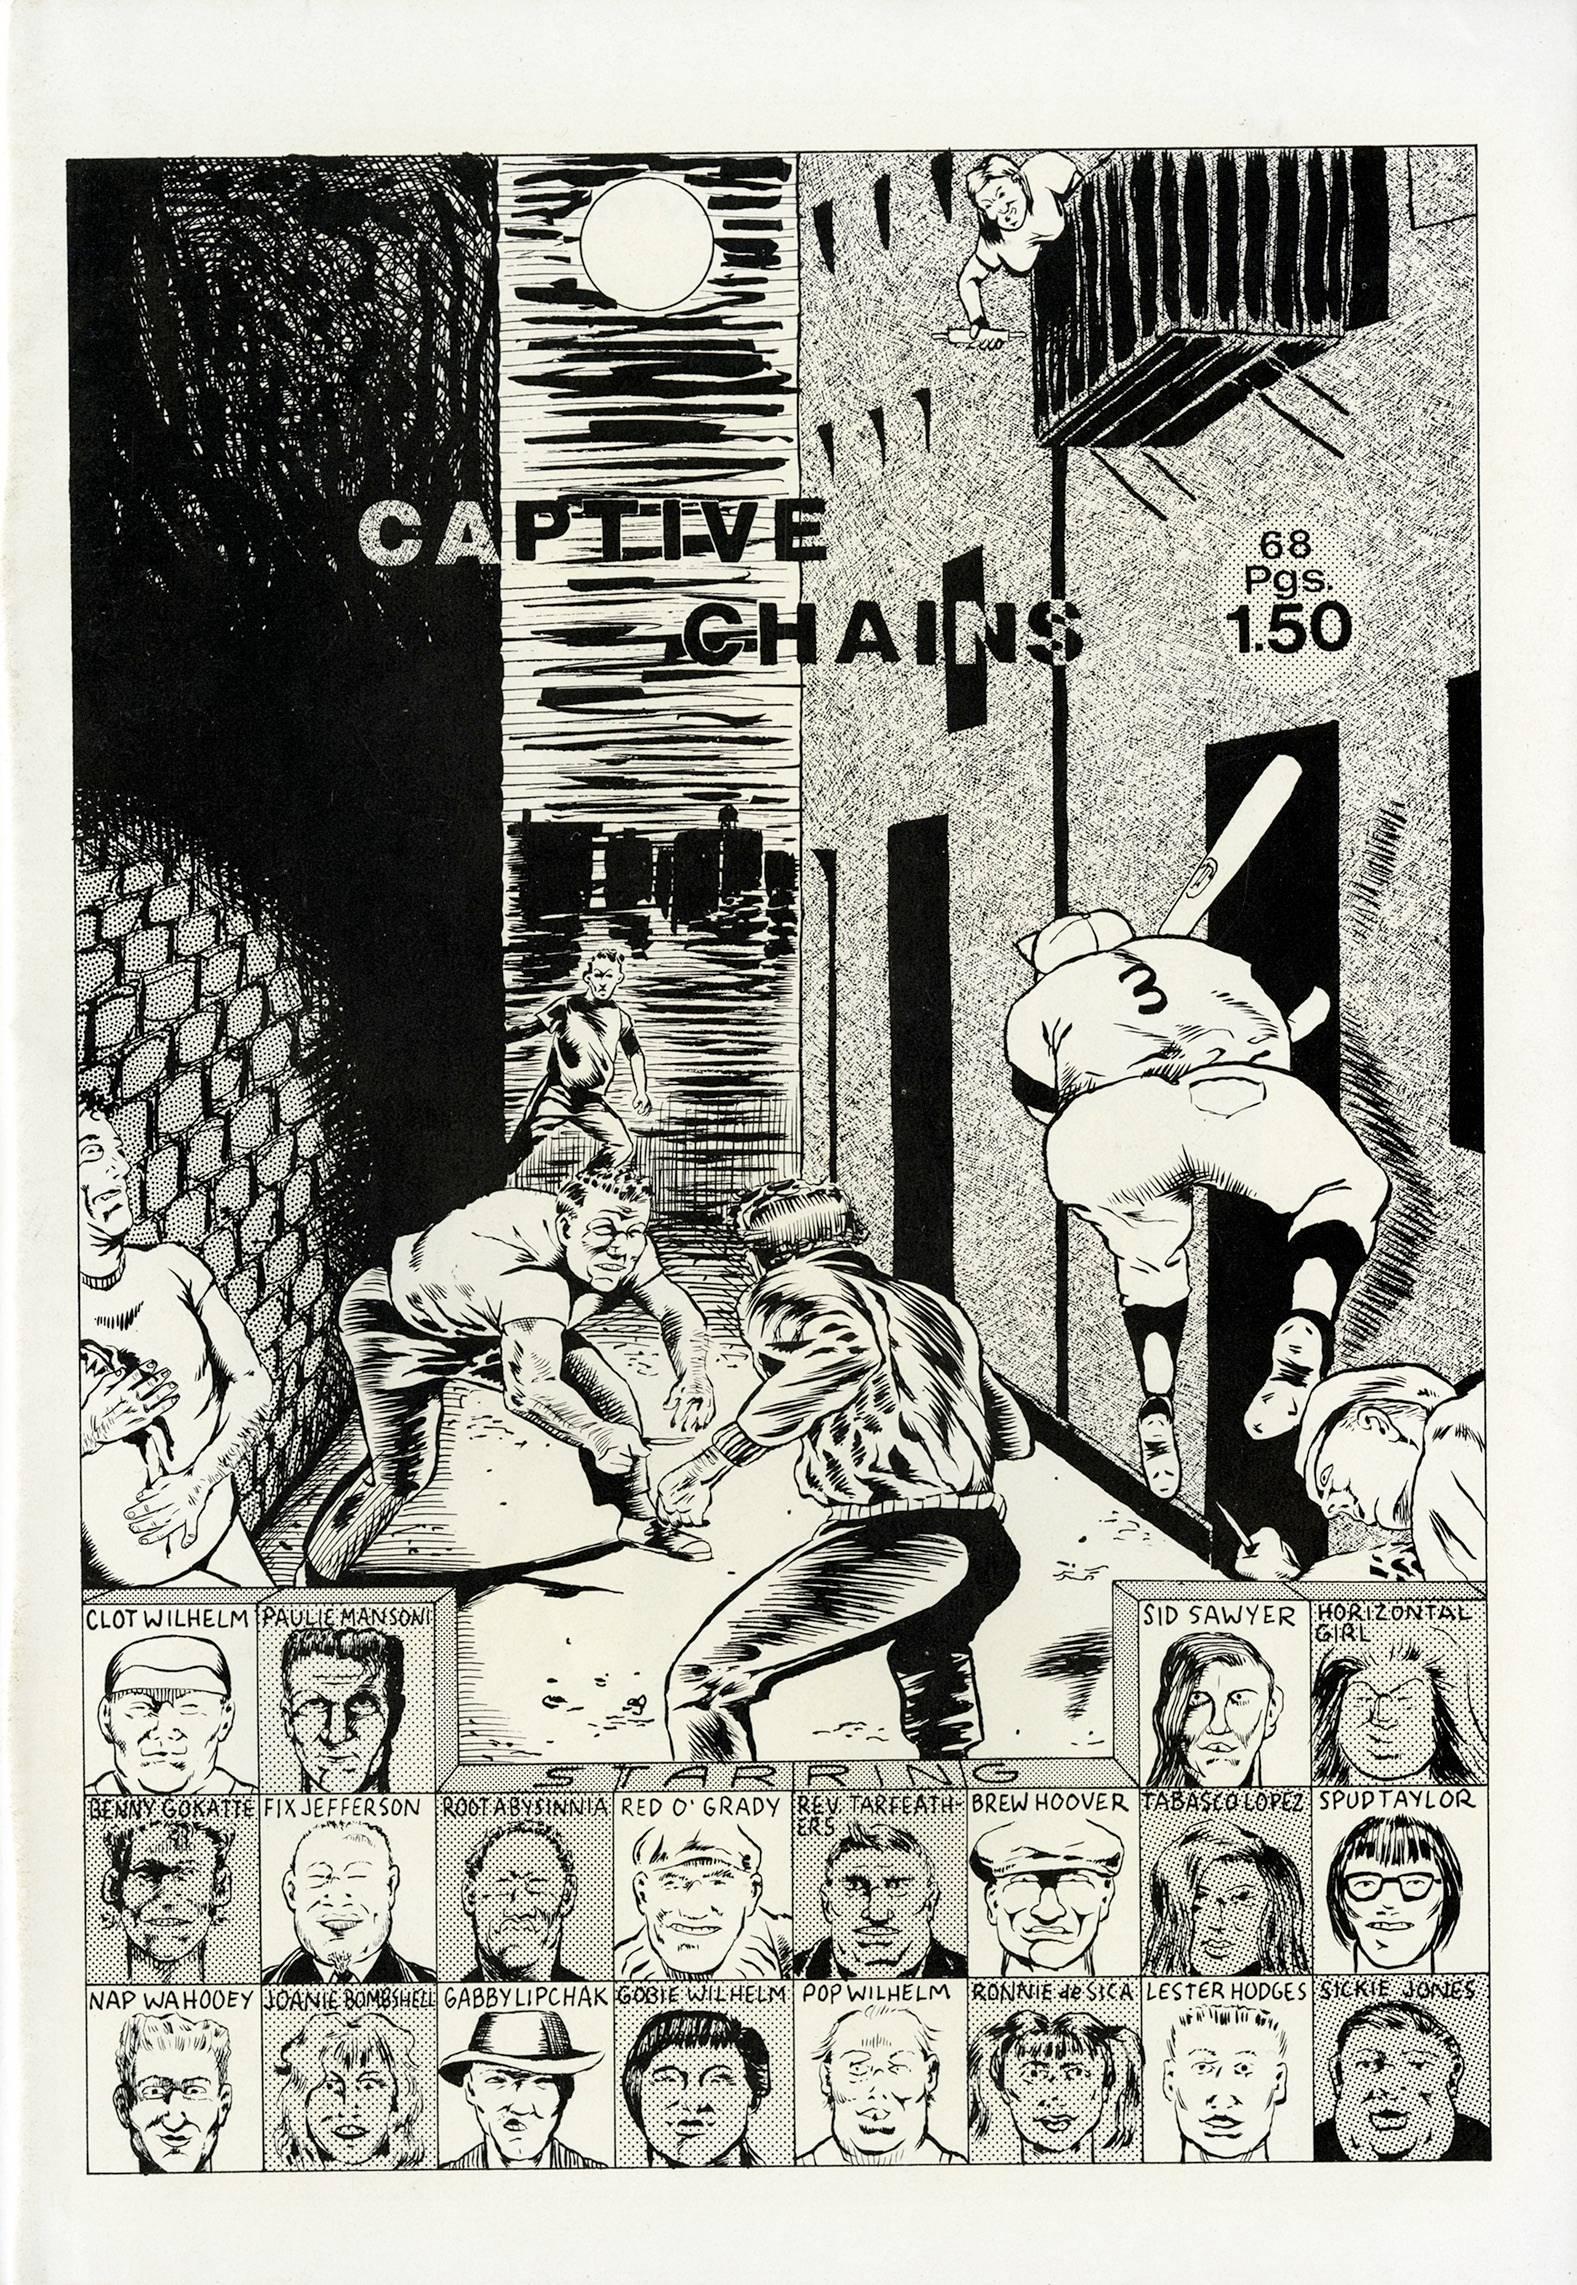 Raymond Pettibon Captive Chains, 1978
Recently featured in its entirety at The New Museum in New York, Pettibon's well documented first artist book is widely regarded as a seminal piece in the development of the artist's style and themes.  Catalogue